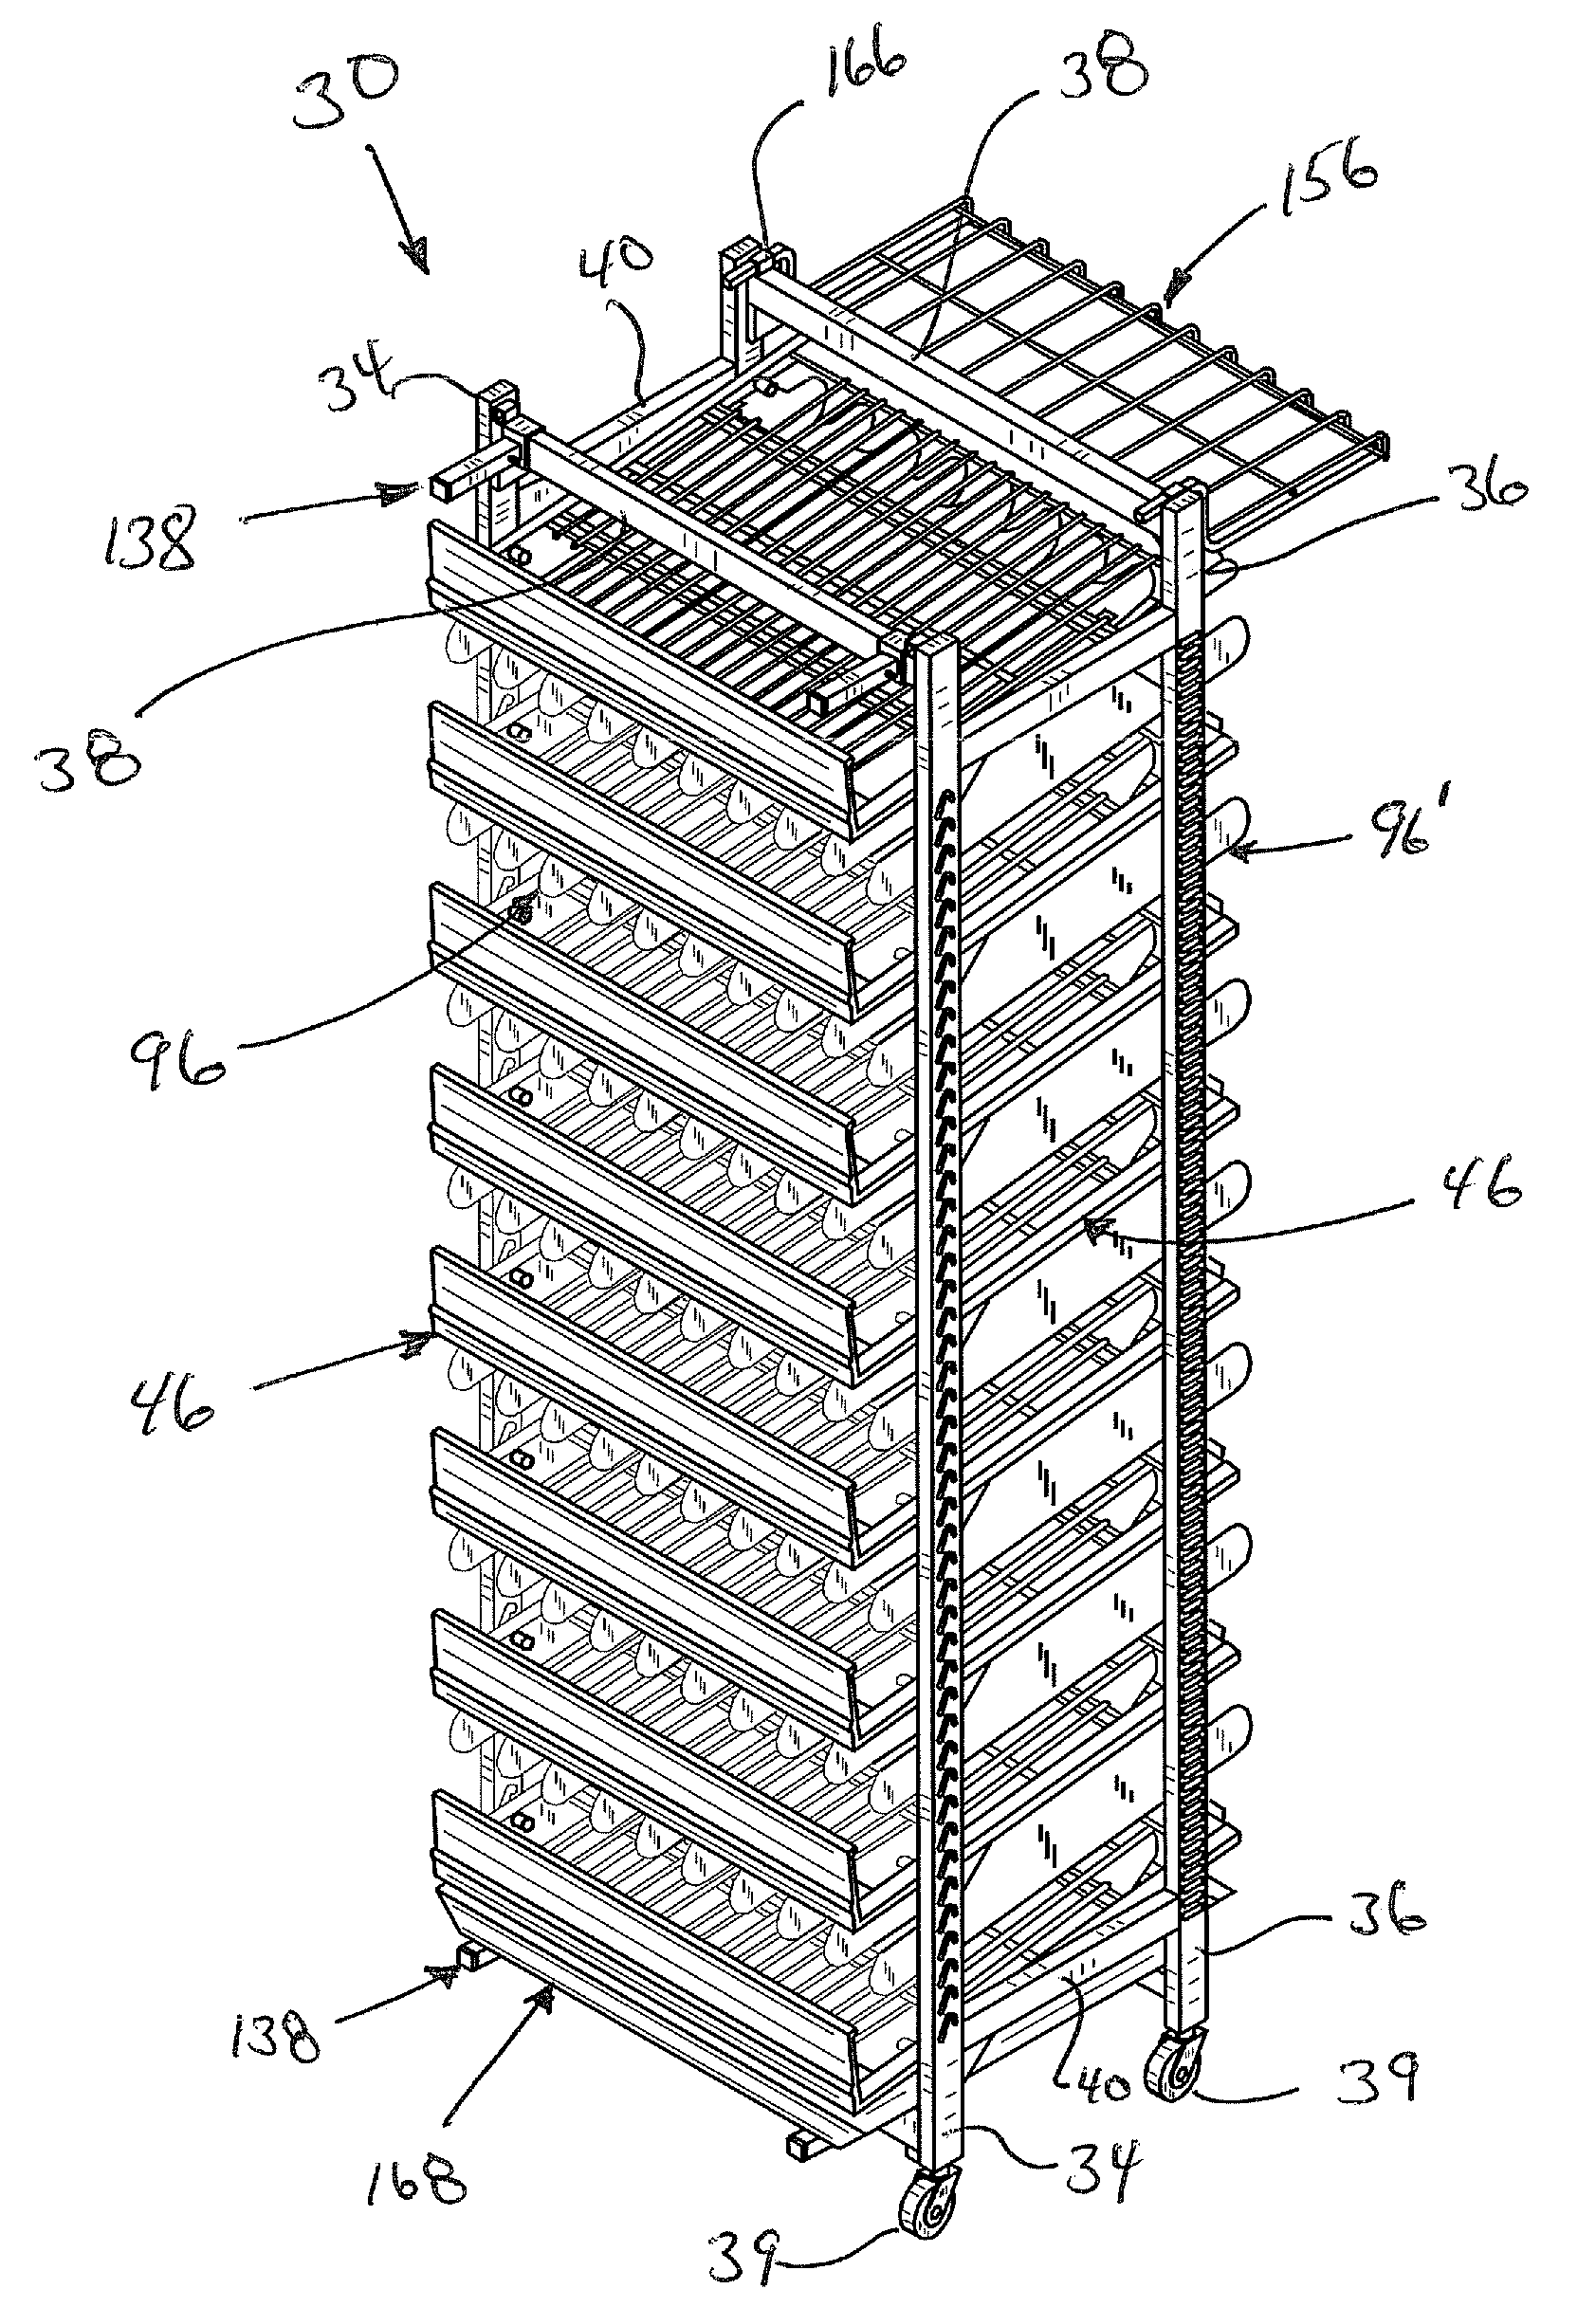 Product merchandising system for walk-in display coolers and the like